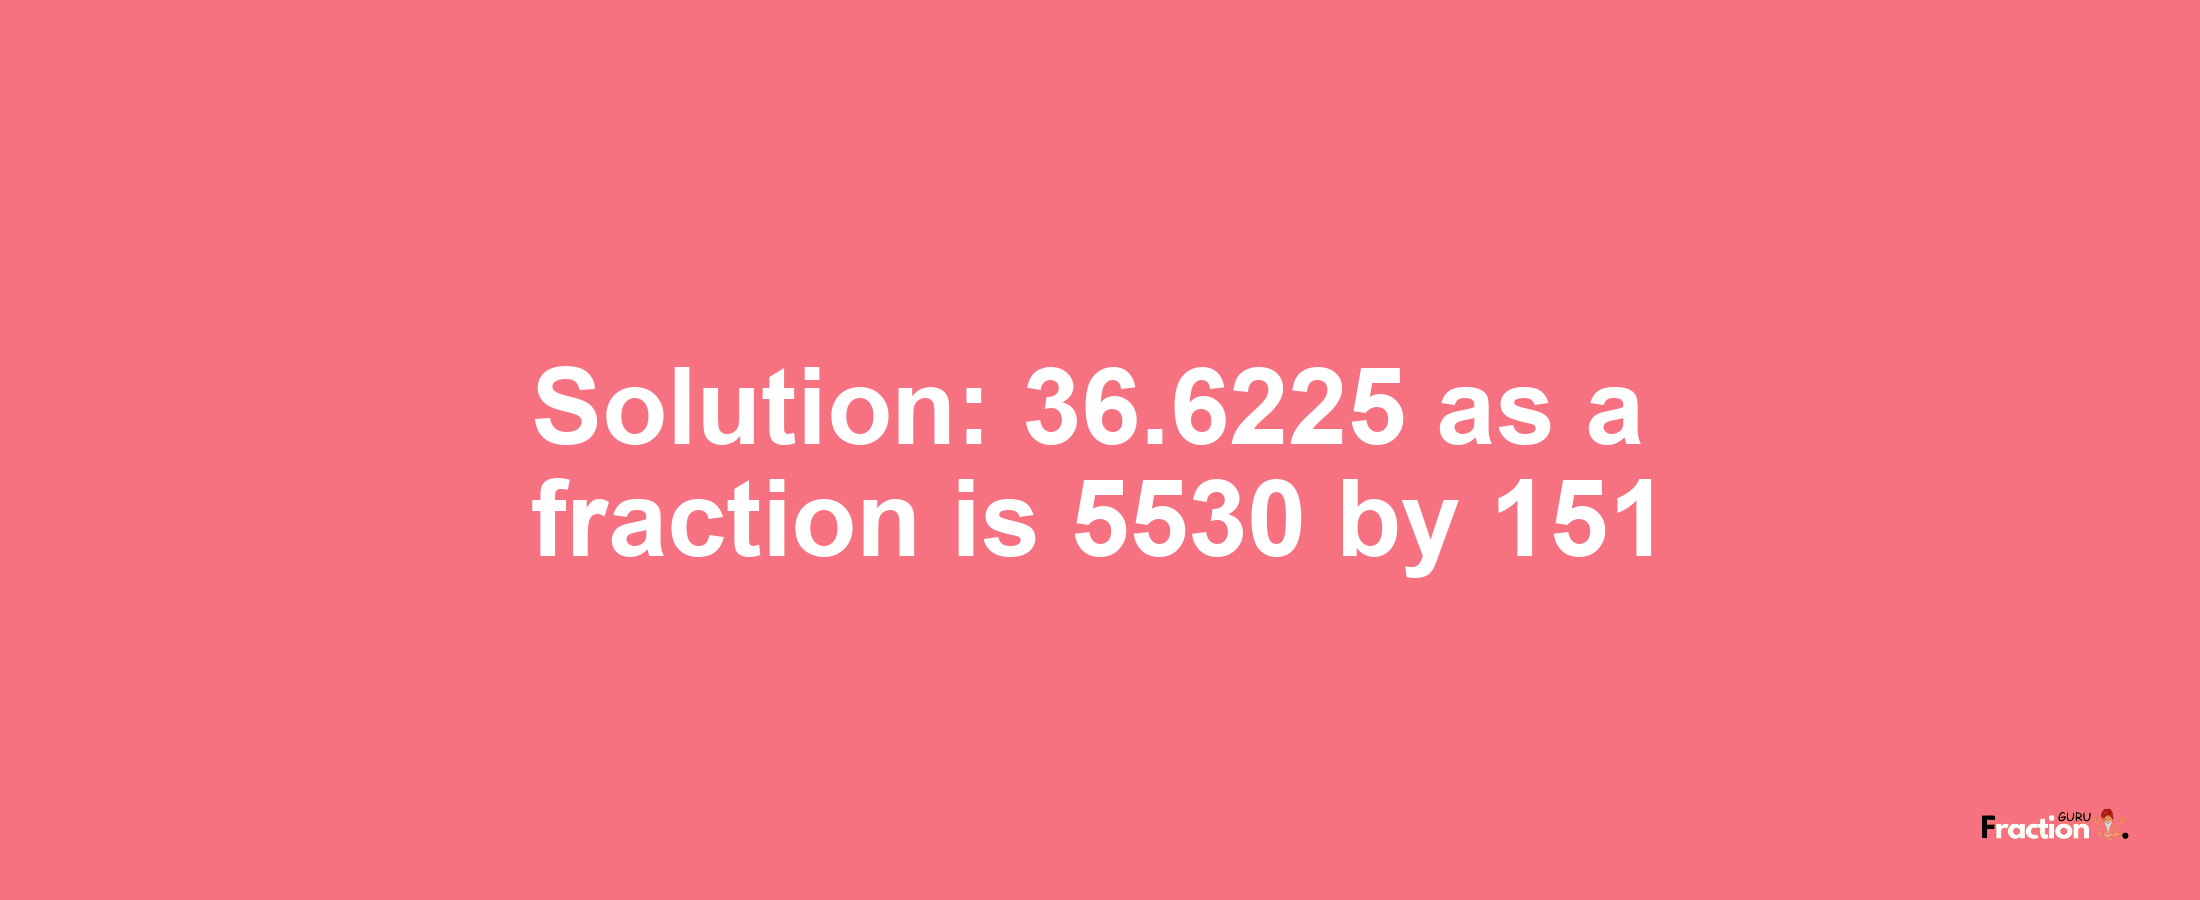 Solution:36.6225 as a fraction is 5530/151